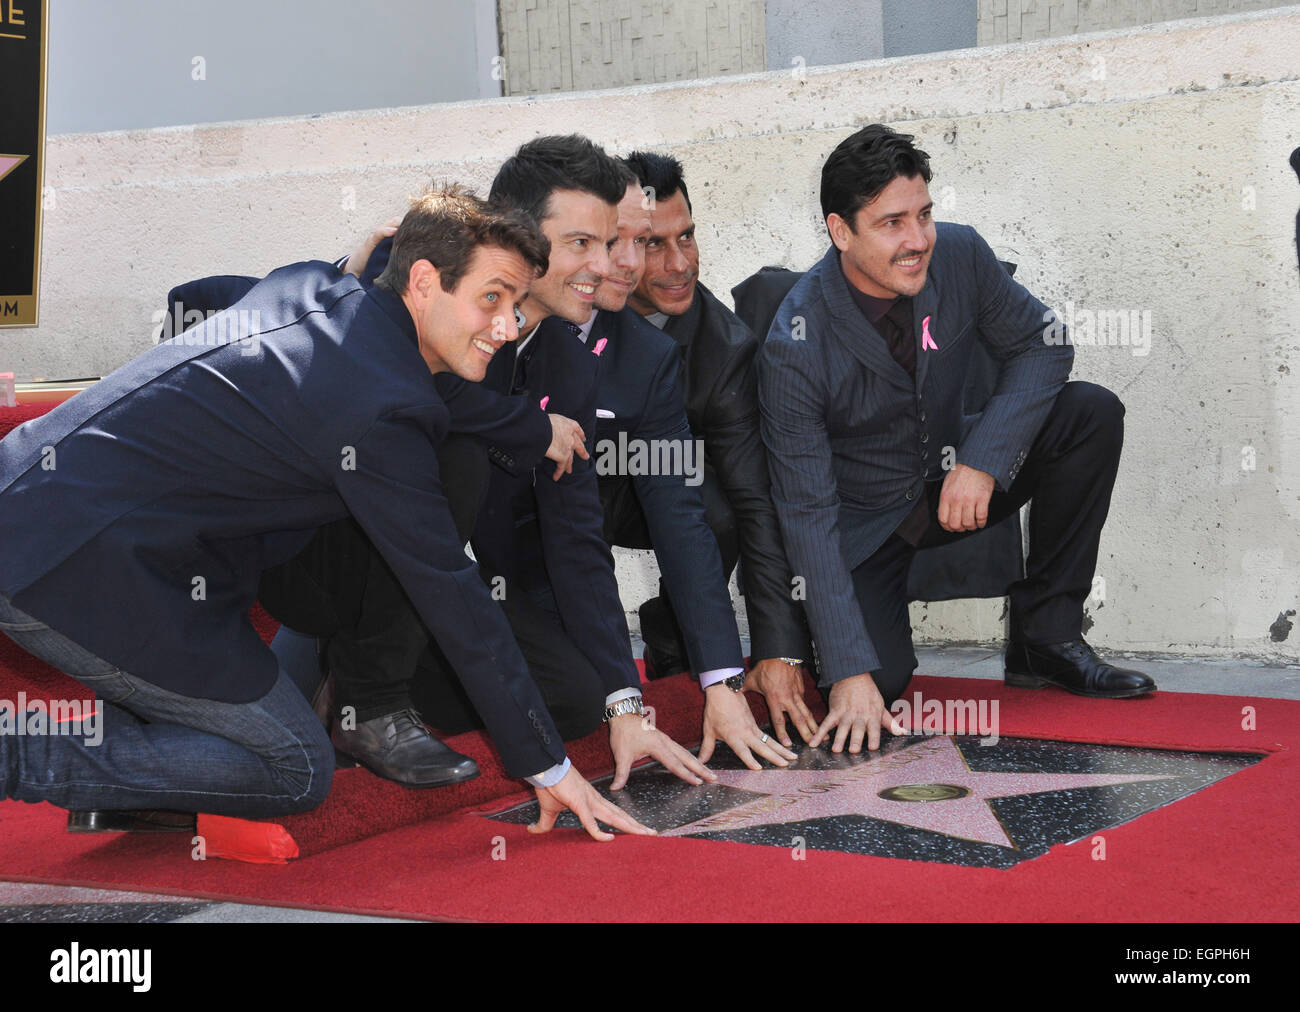 LOS ANGELES, CA - OCTOBER 9, 2014: Pop group New Kids On The Block - Jordan Knight, Jonathan Knight, Donnie Wahlberg, Joey McIntyre & Danny Wood - on Hollywood Boulevard where they were honored with the 2,530th star on the Hollywood Walk of Fame. Stock Photo